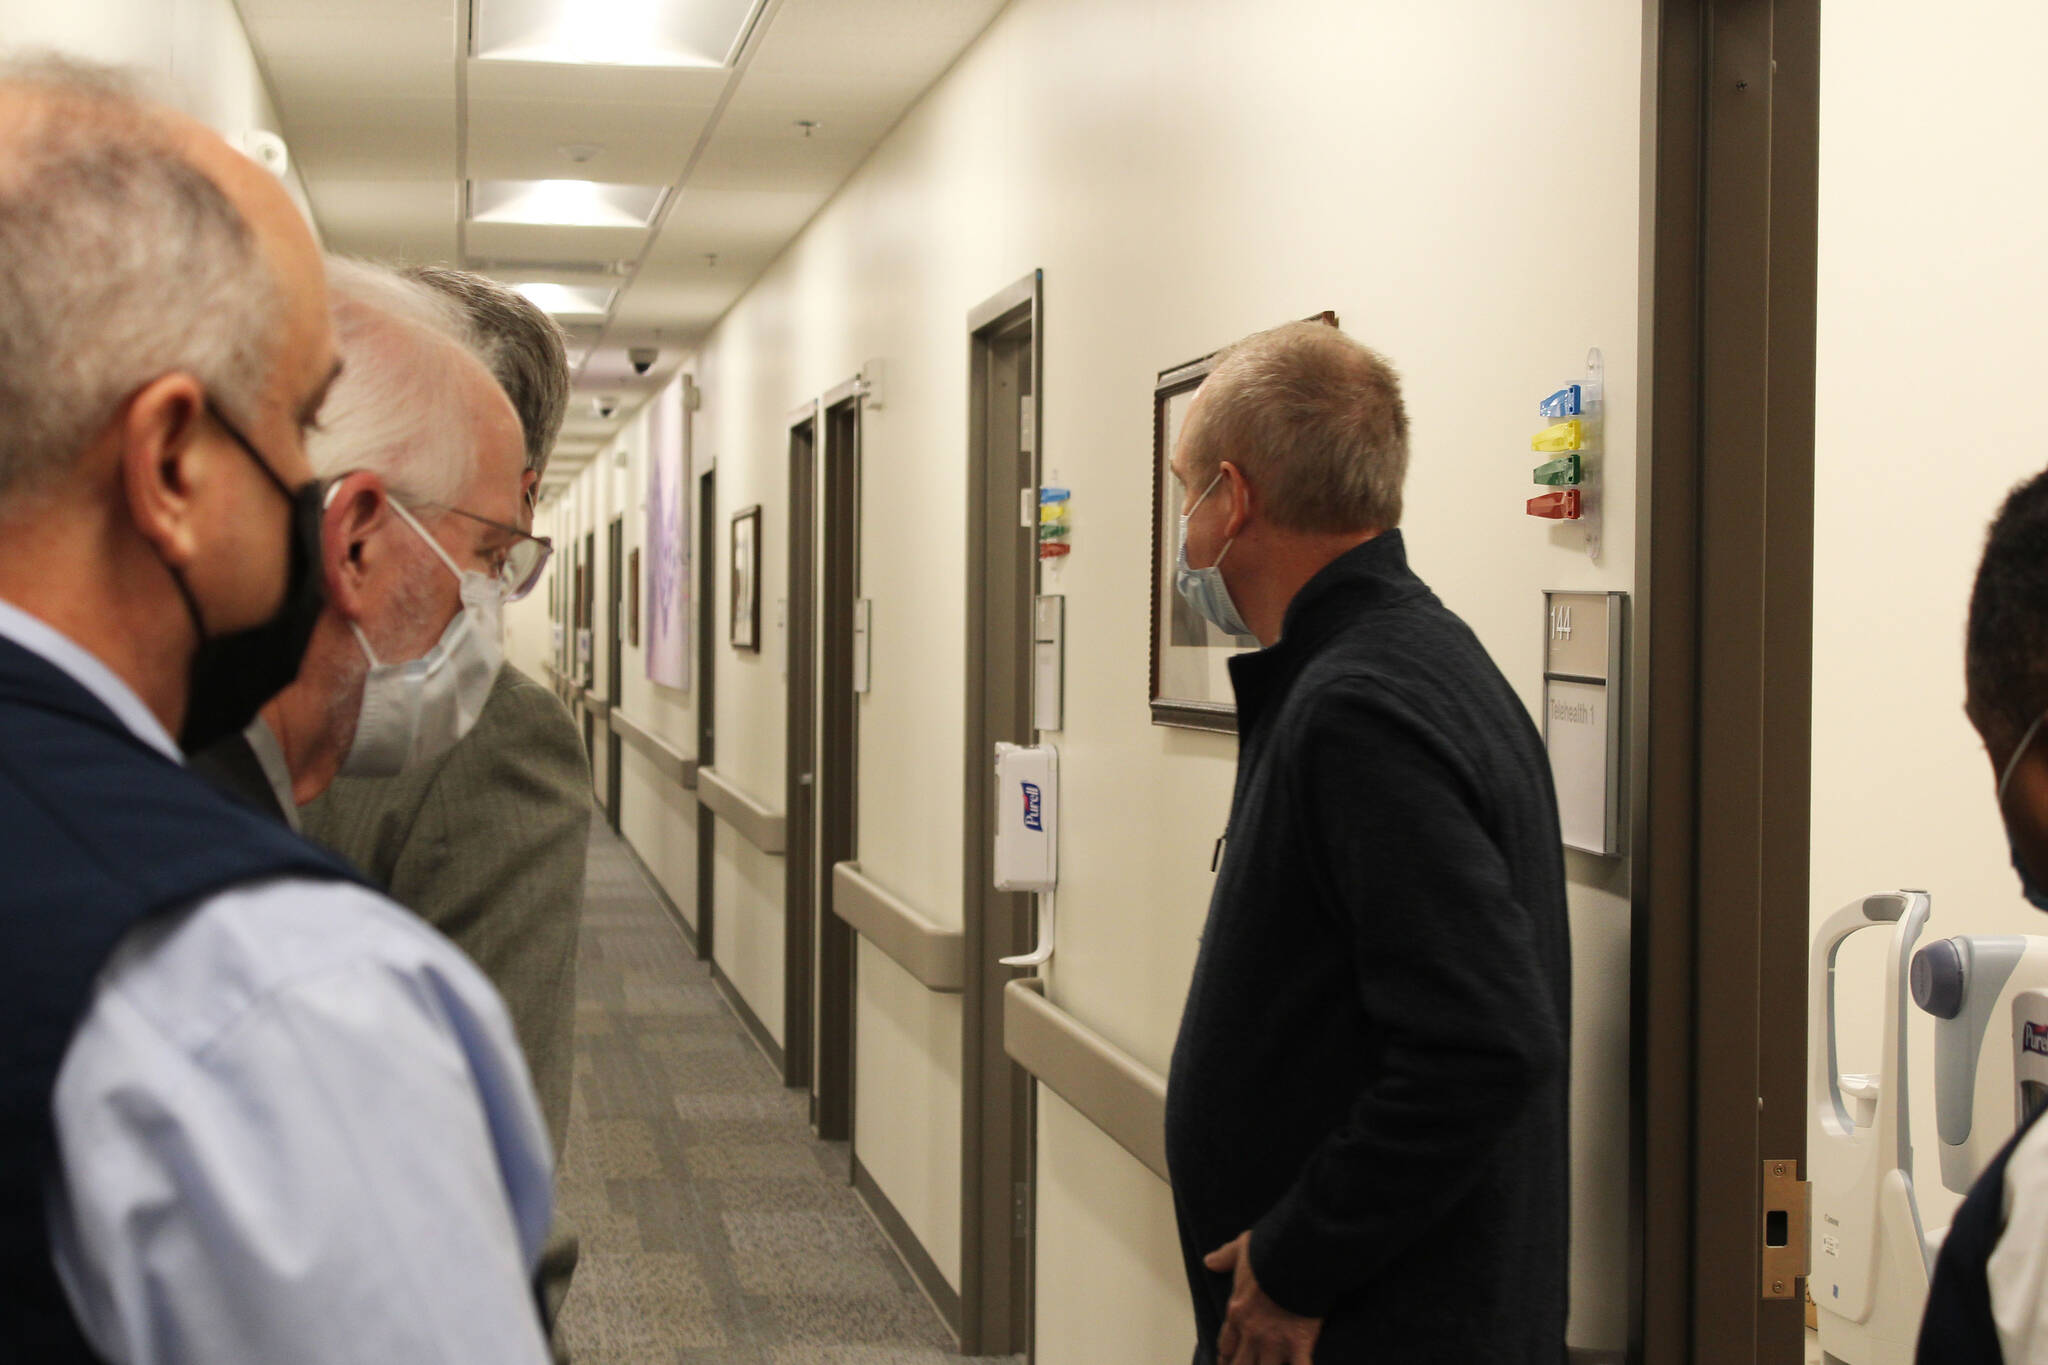 Tom Steinbrunner leads a tour of the Soldotna Community Based Outpatient Clinic on Wednesday, Dec. 29, 2021 in Soldotna, Alaska. (Ashlyn O’Hara/Peninsula Clarion)